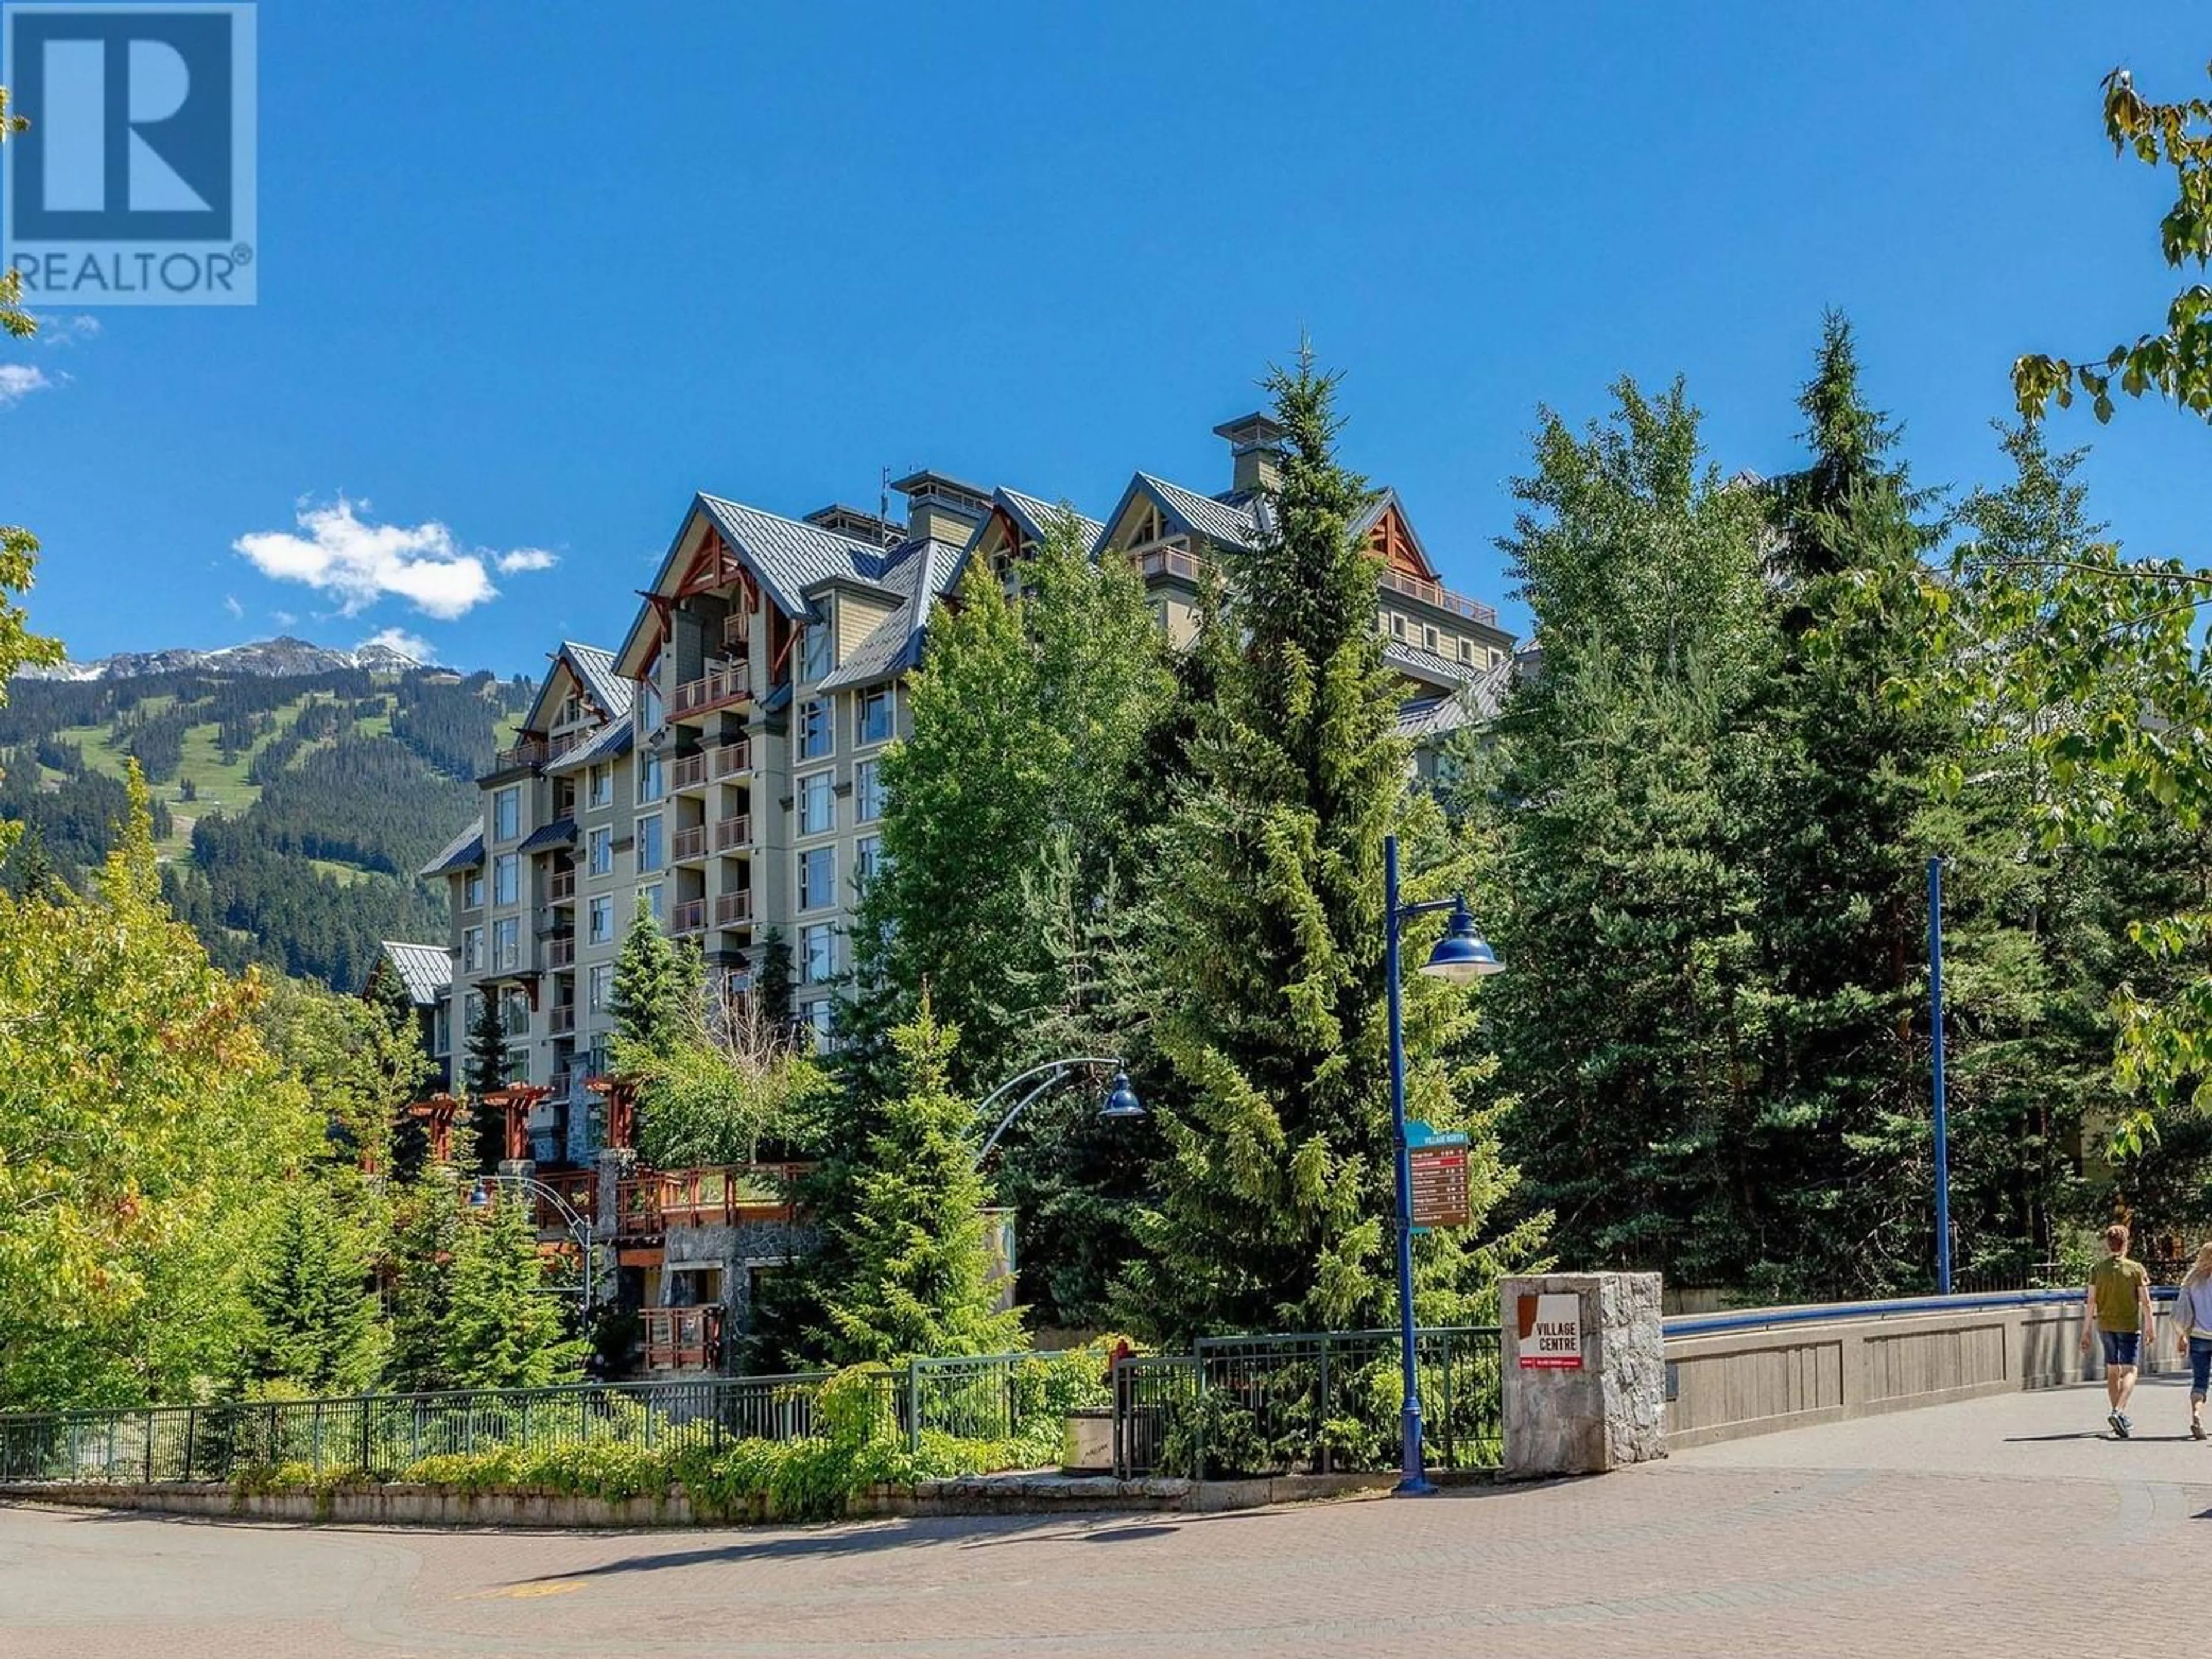 A pic from exterior of the house or condo for 5504 4299 BLACKCOMB WAY, Whistler British Columbia V8E0X3